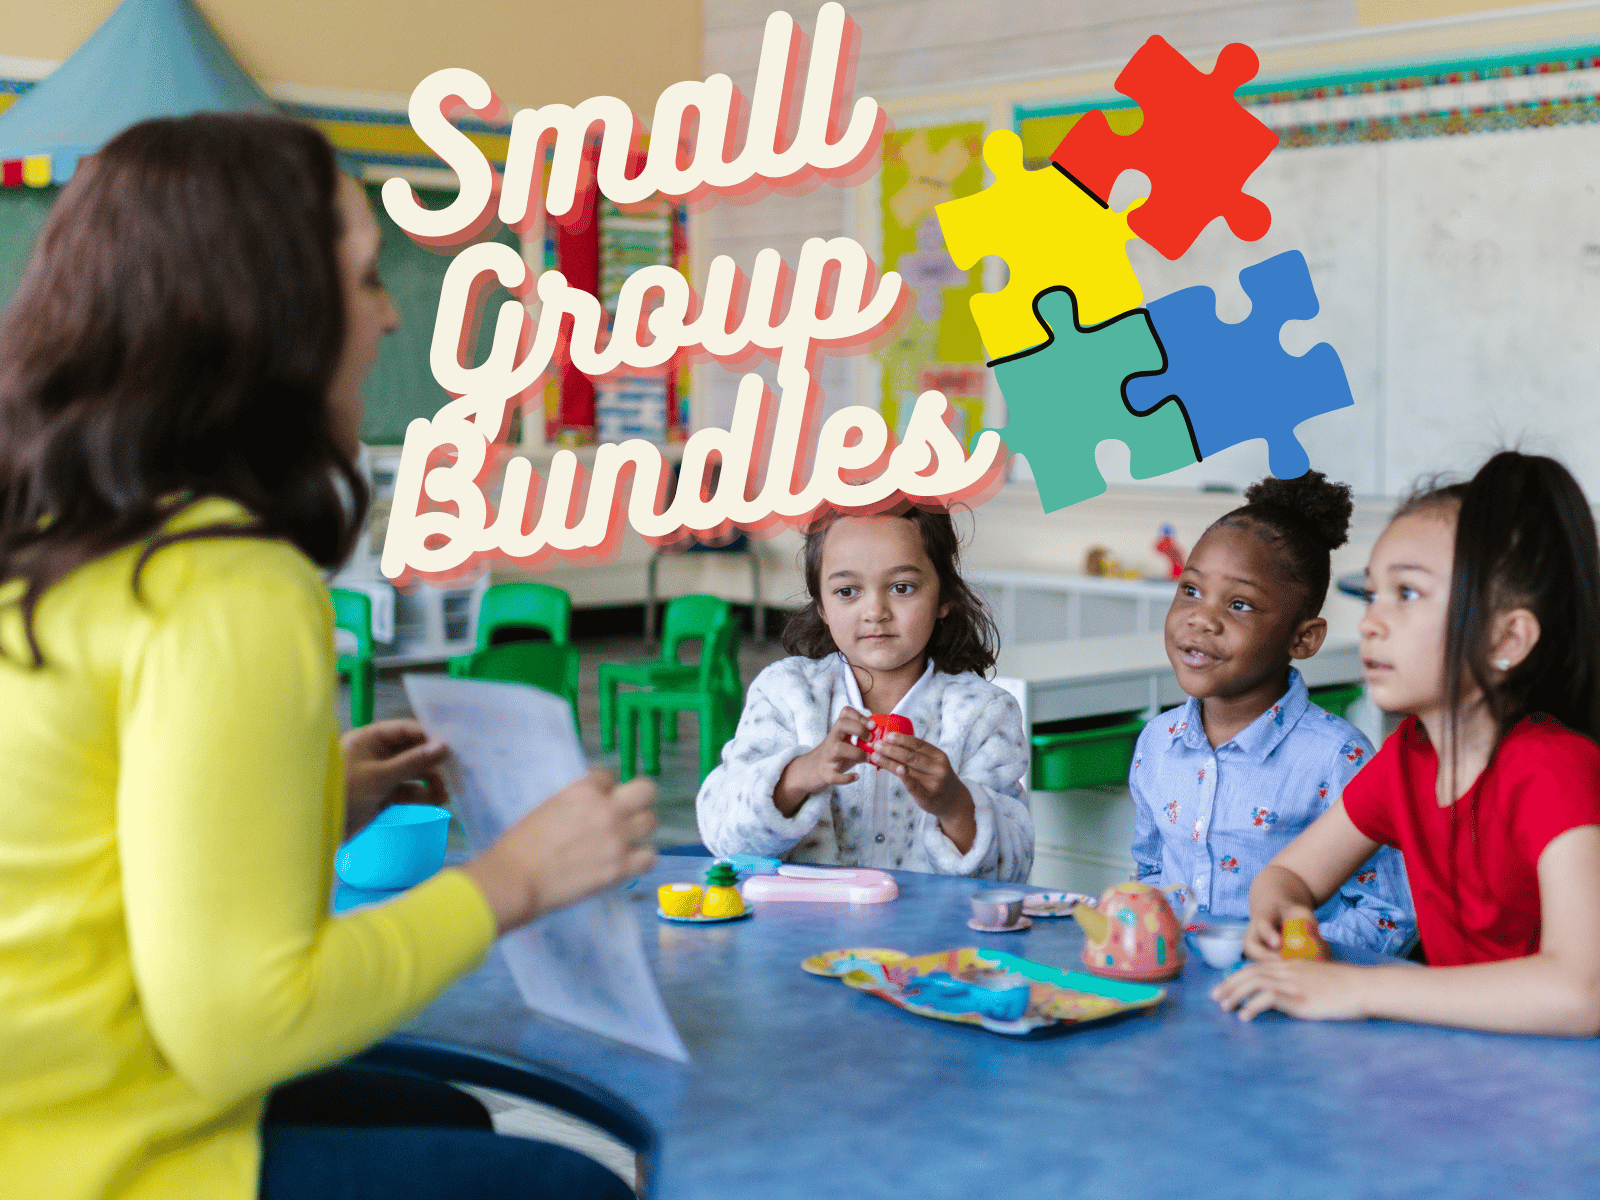 Small Groups: Work and Bundles